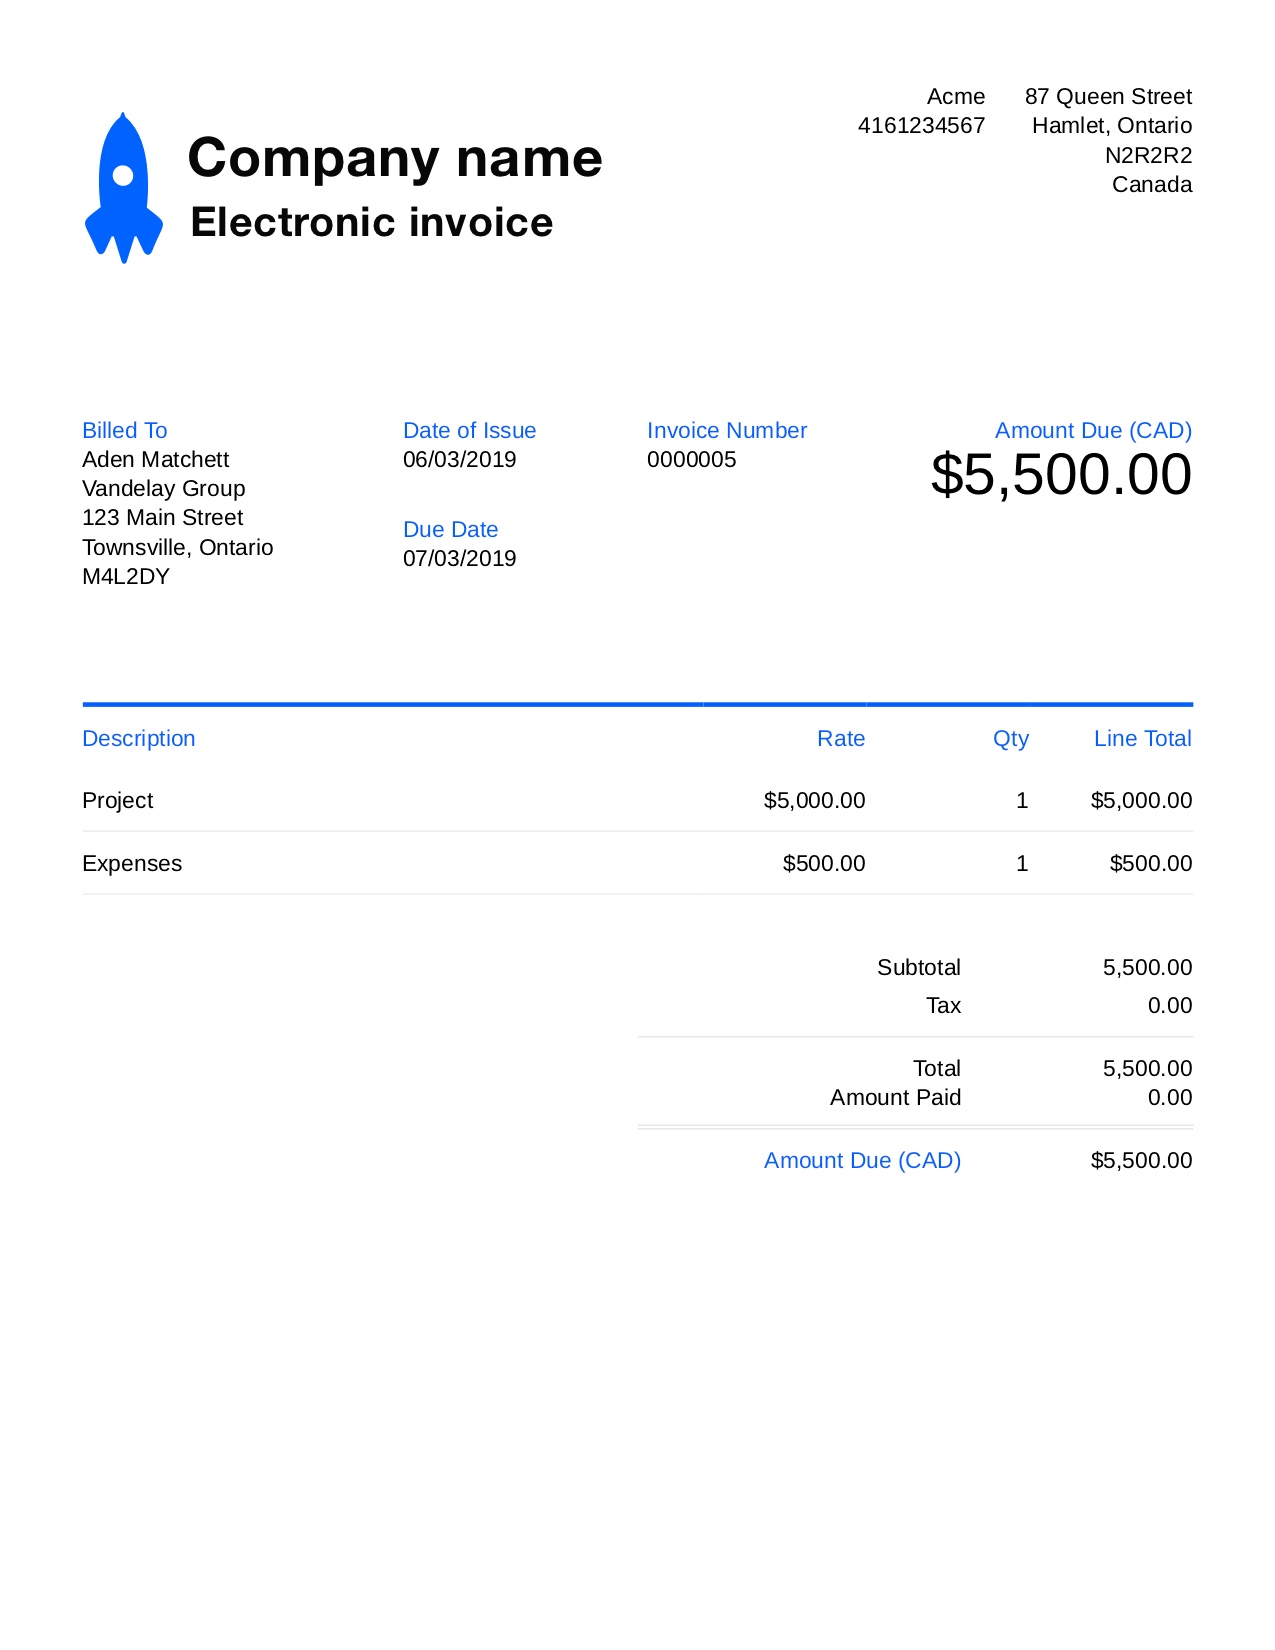 e invoice meaning